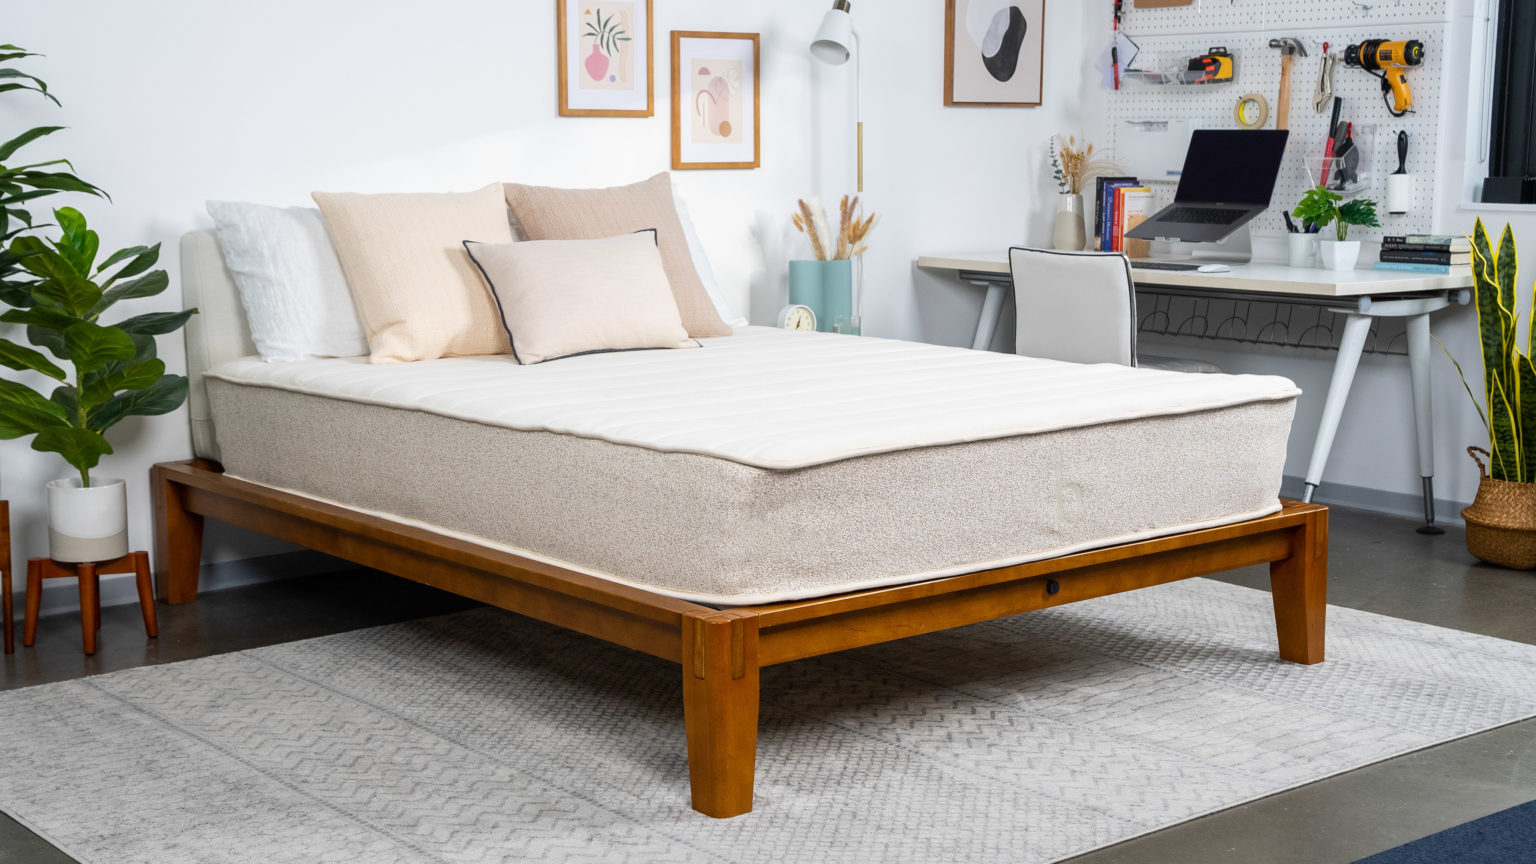 What is the foundation of restful nights? Understanding the importance of a quality mattress